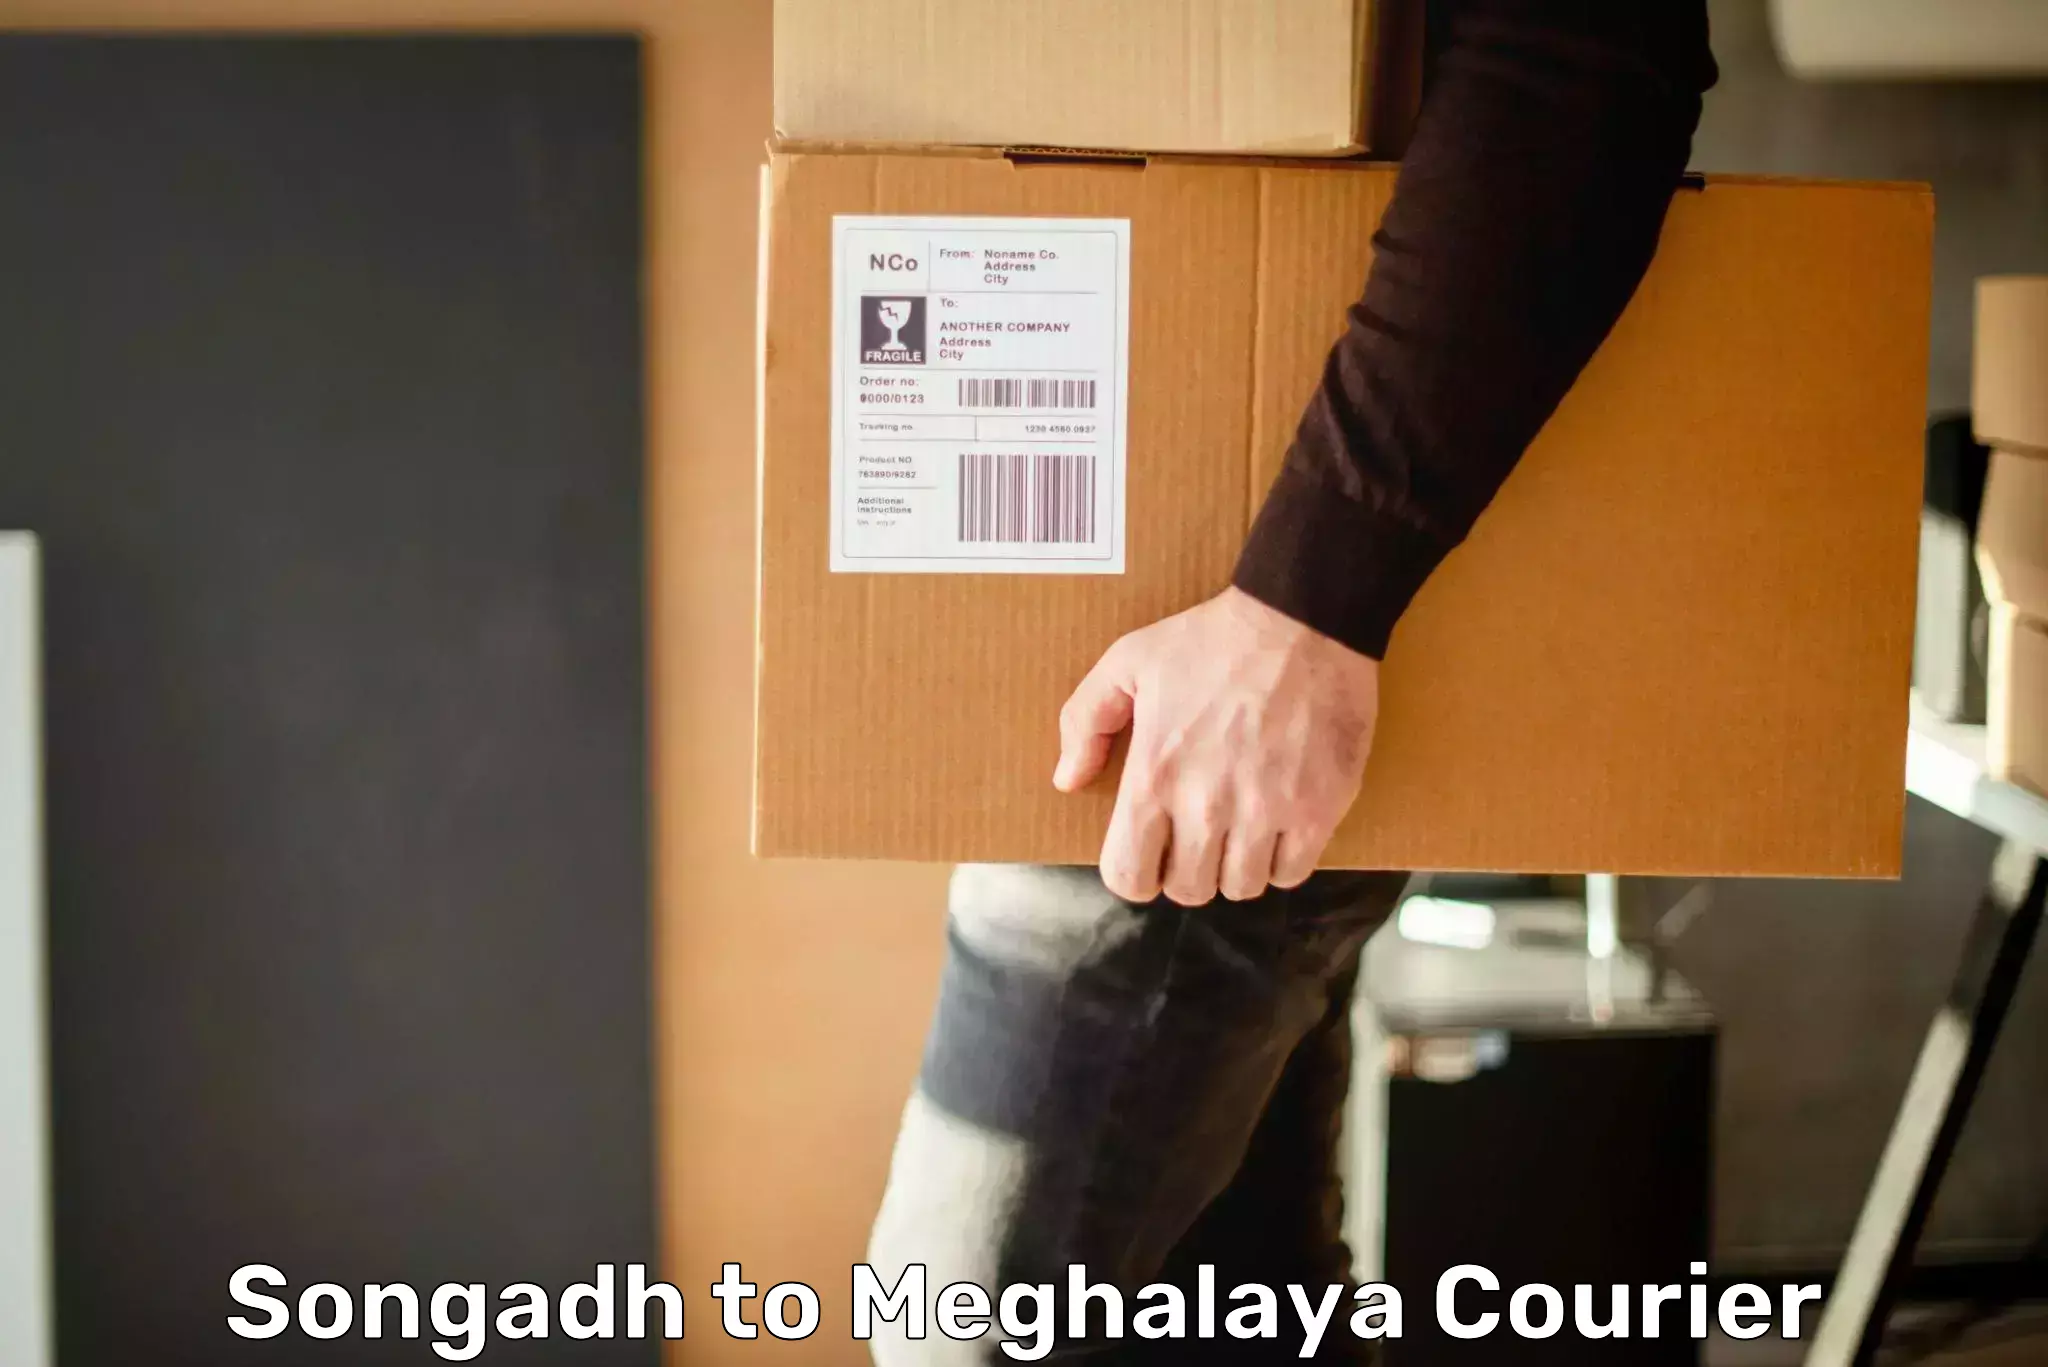 Automated parcel services Songadh to Shillong